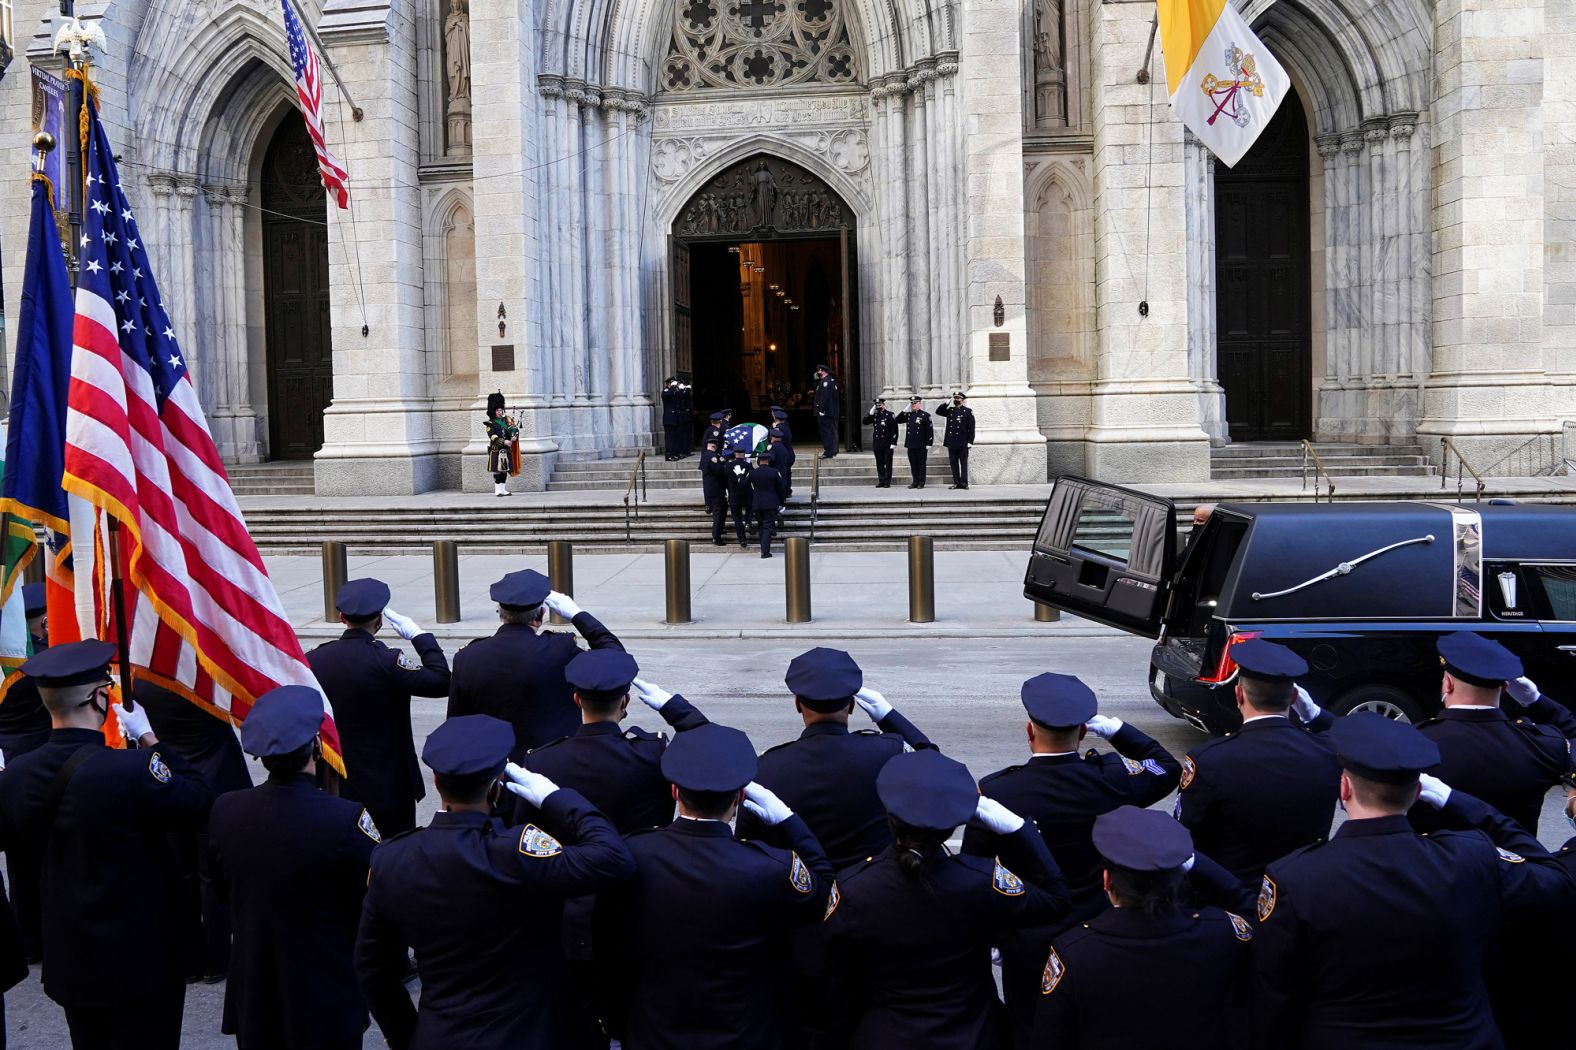 Rivera's casket arrives at St. Patrick's Cathedral on January 27.